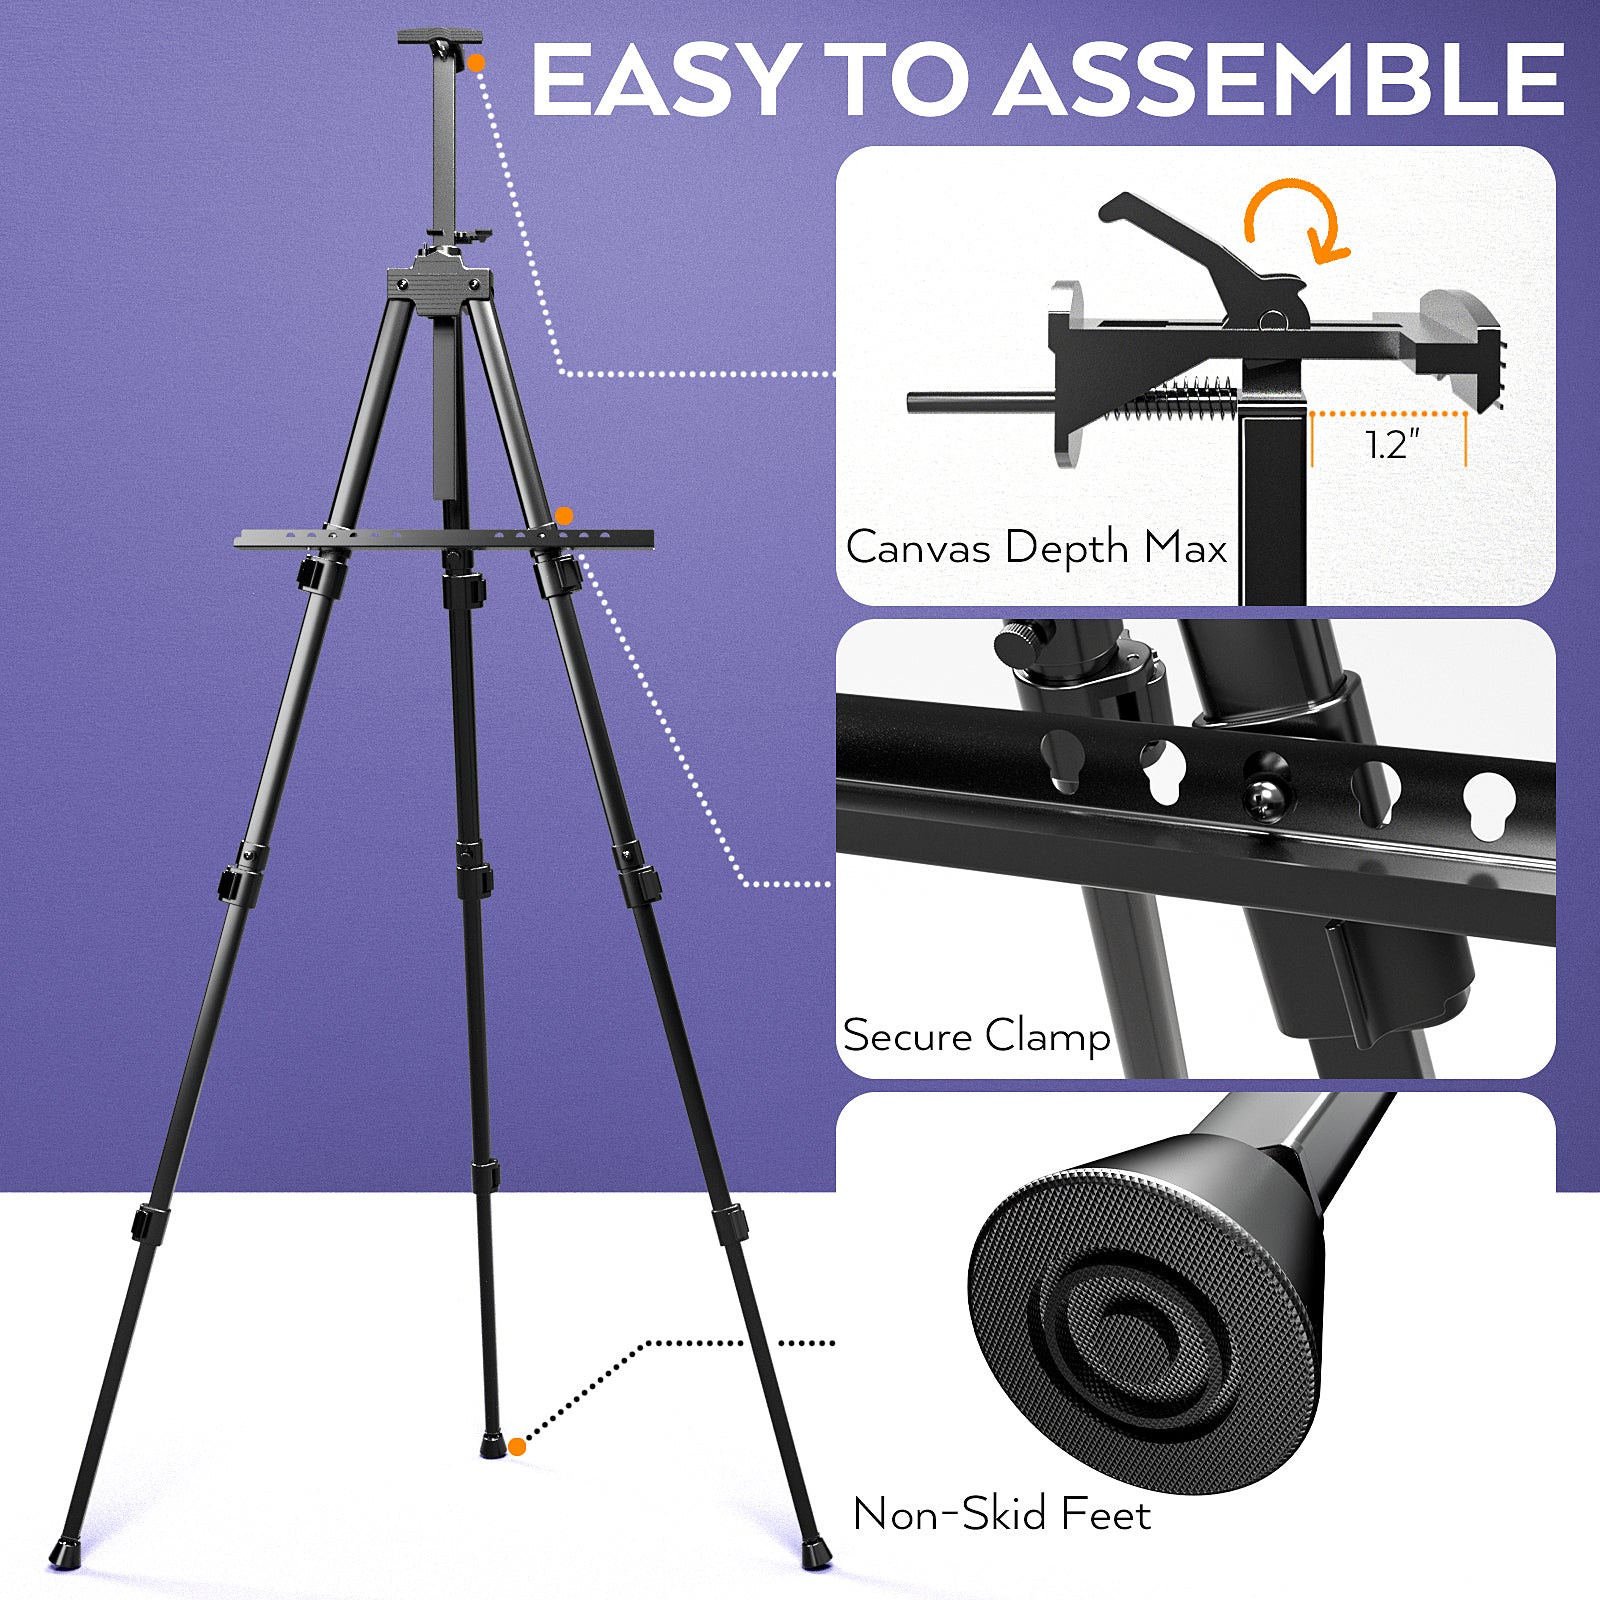 Nicpro Painting Easel for Display, Adjustable Height 17" to 63" Tabletop & Floor Art Easel, Aluminum Tripod Artist Easels Stand for Painting Canvas, Wedding Signs with Carry Bag - Black